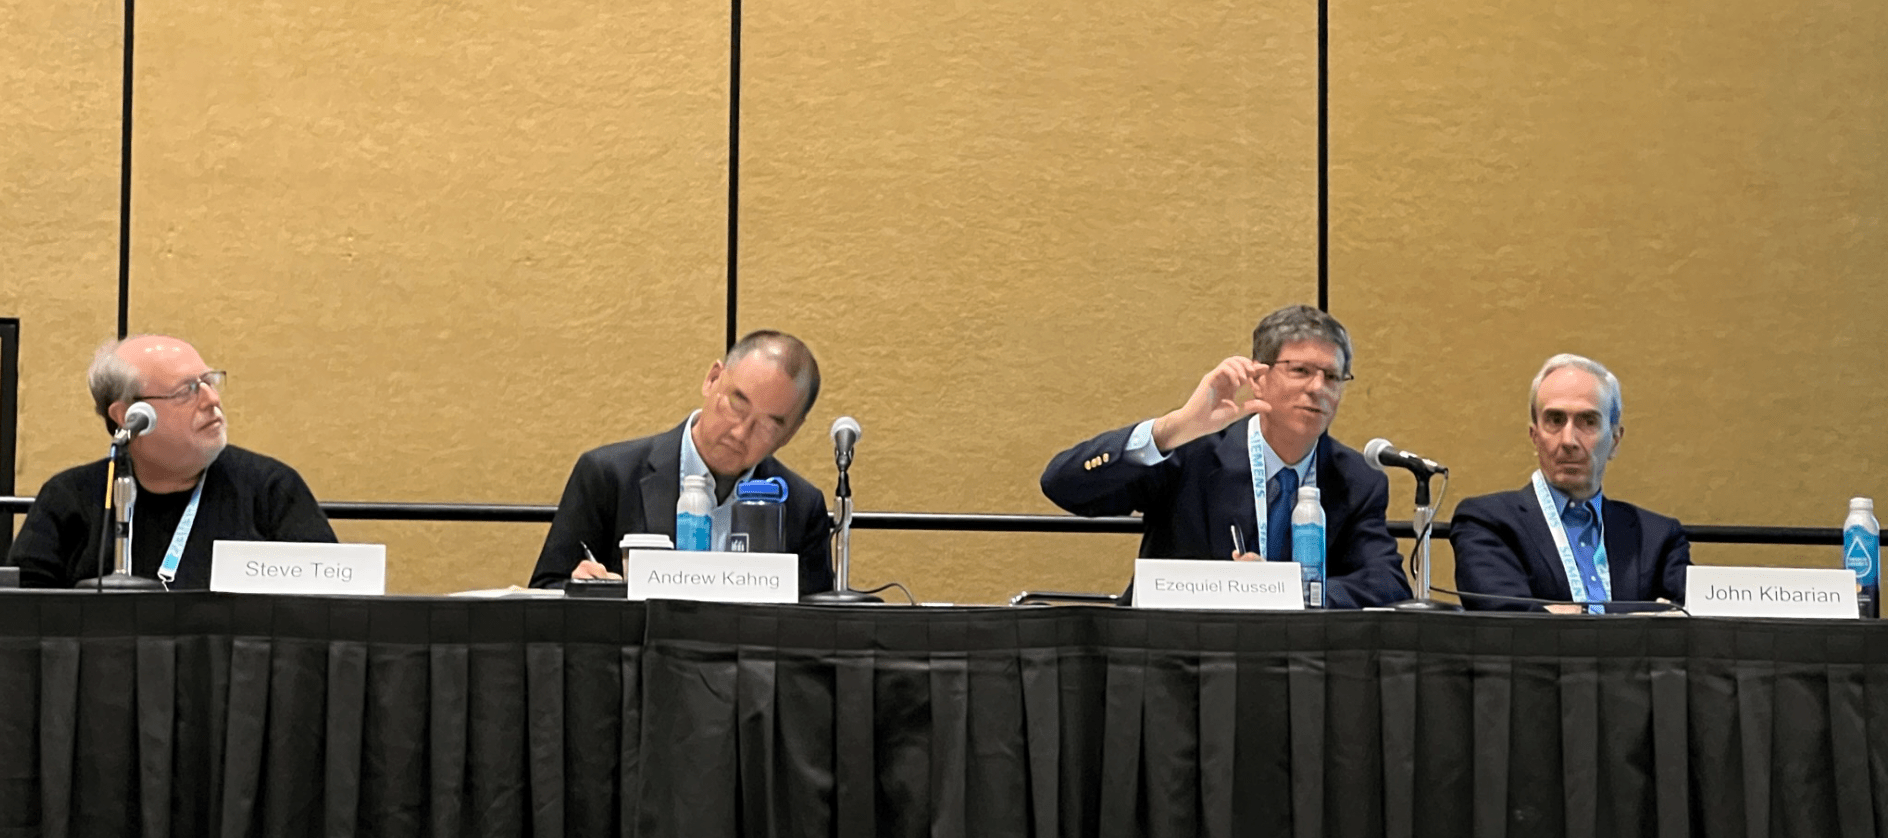 Above, left to right, Steve Kieg , CEO Perceive; Andrew Kahng, professor at UCSD; Ezequiel Russell, senior director of mask technology, Micron; John Kibarian, CEO, PDF Solutions; Aki Fujimura. D2S (not pictured) at the Curvy Design Panel at DAC 2023 on Tuesday, July 11.